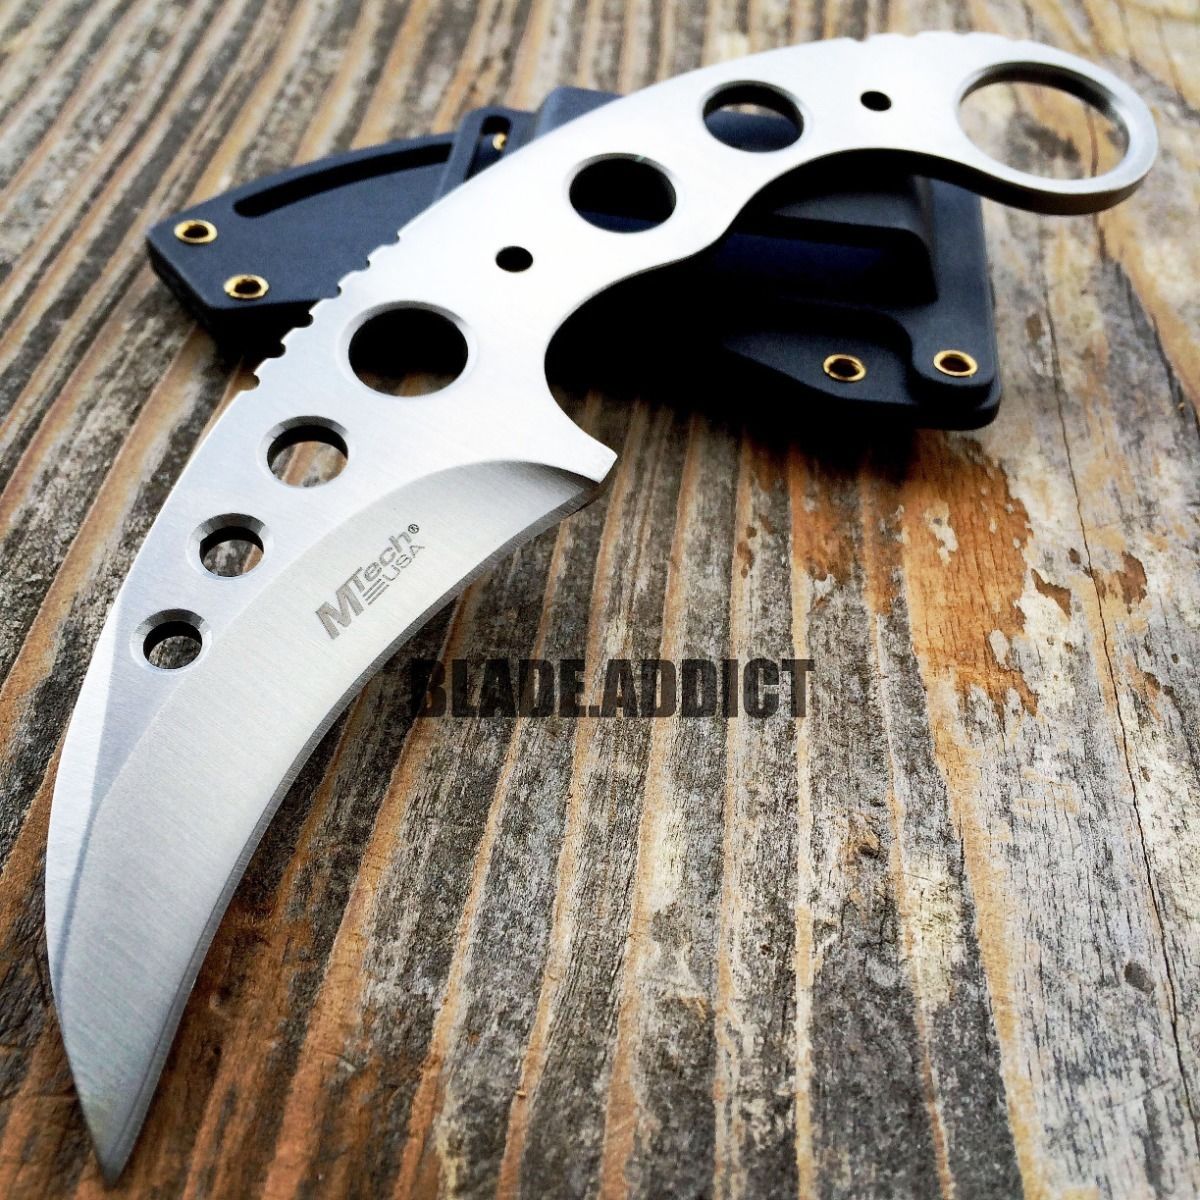 9" TAC FORCE Titanium Milano Stiletto Tactical Spring Assisted Open Pocket Knife